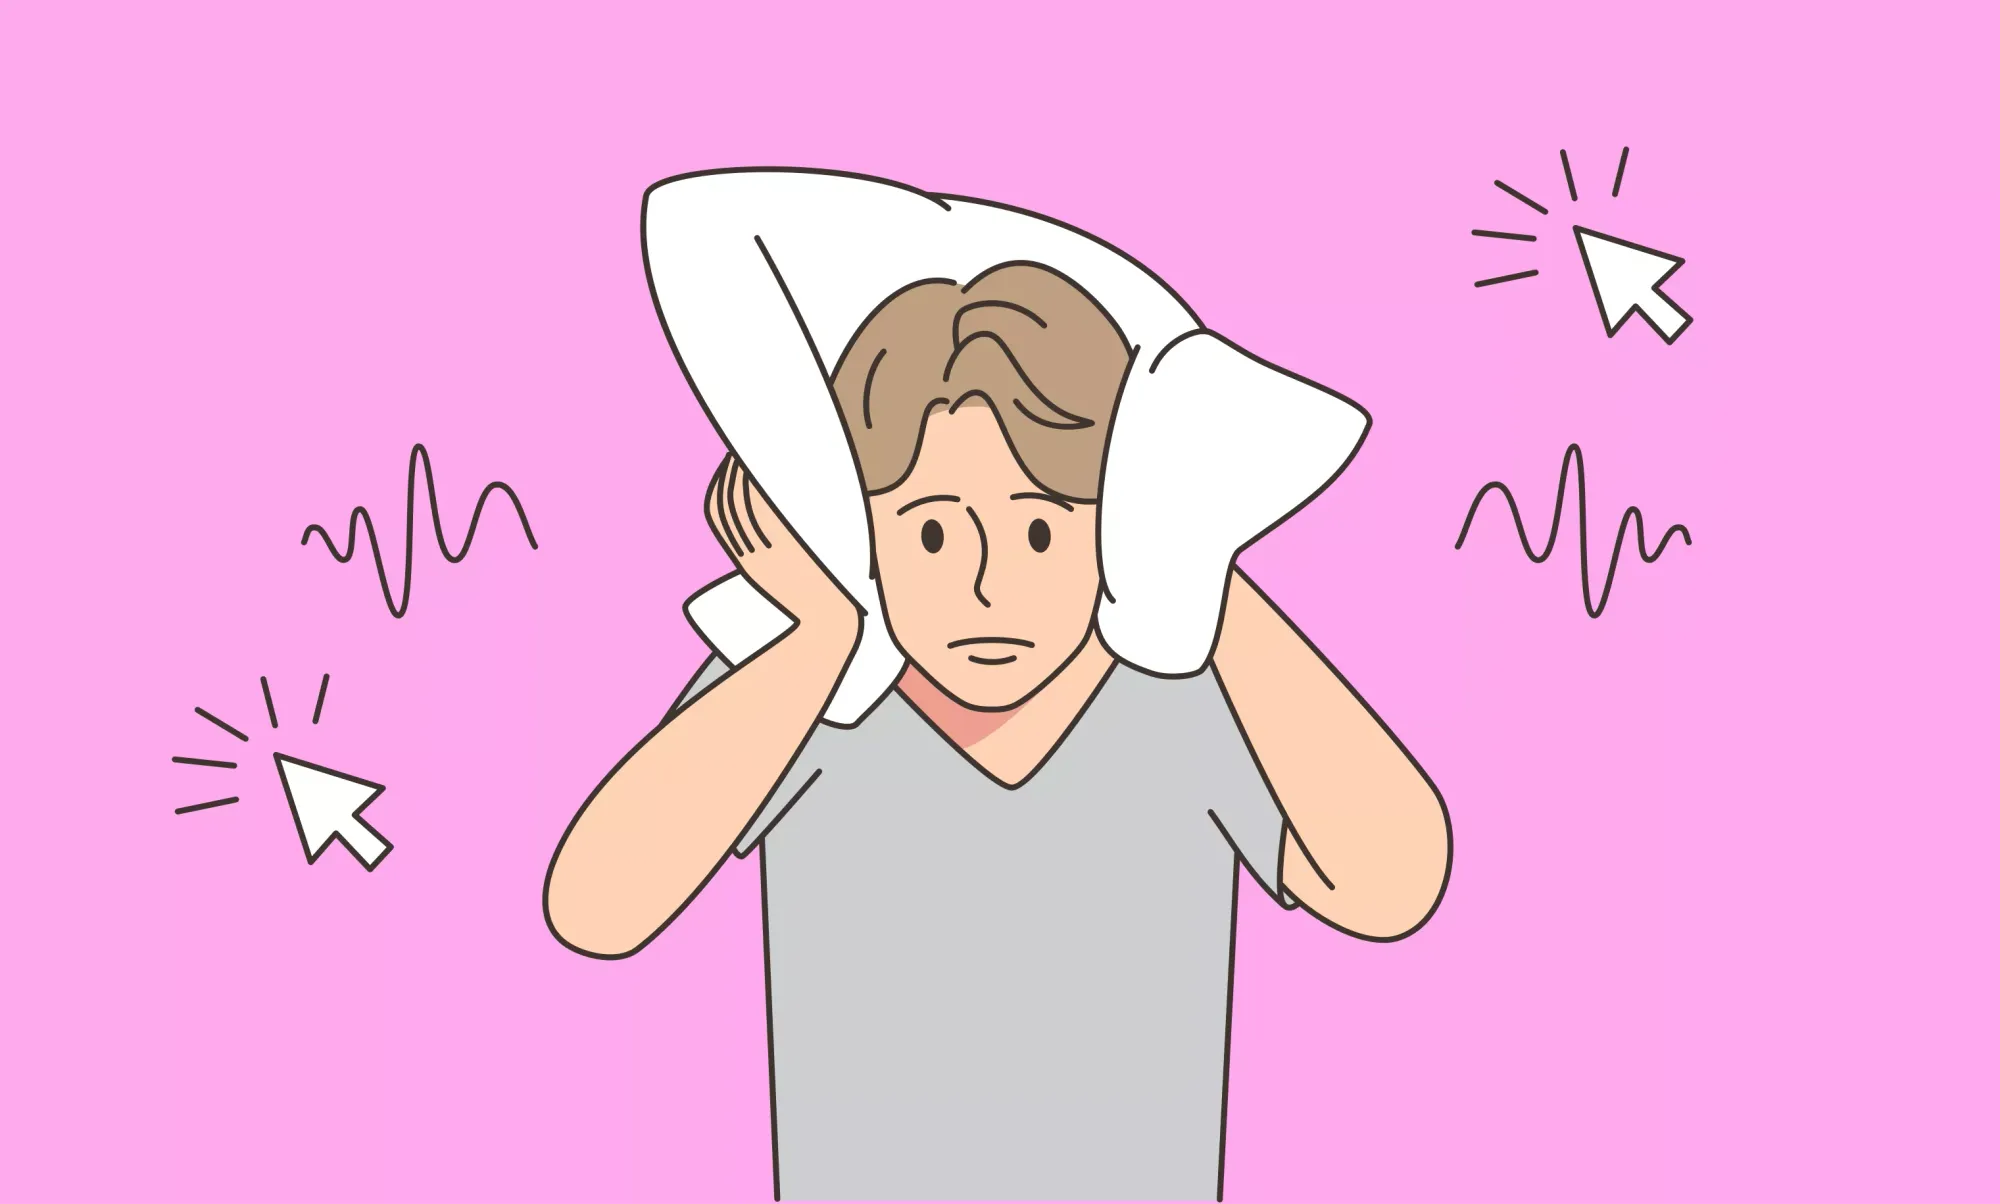 Man holding a pillow wrapped around his head to cover his ears.